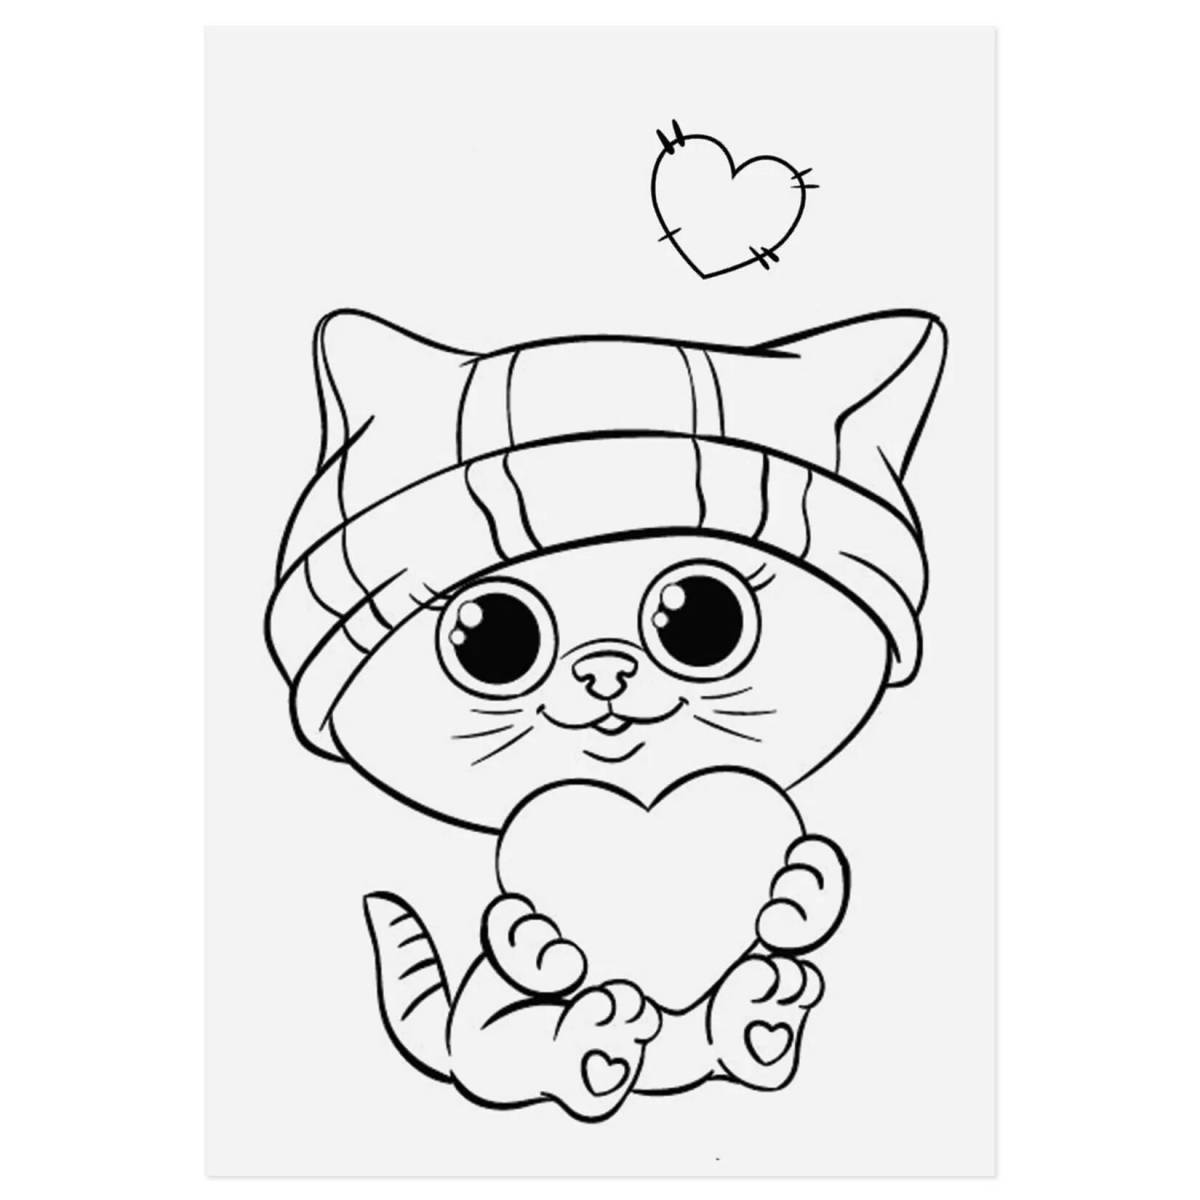 Chi loving kitten coloring page